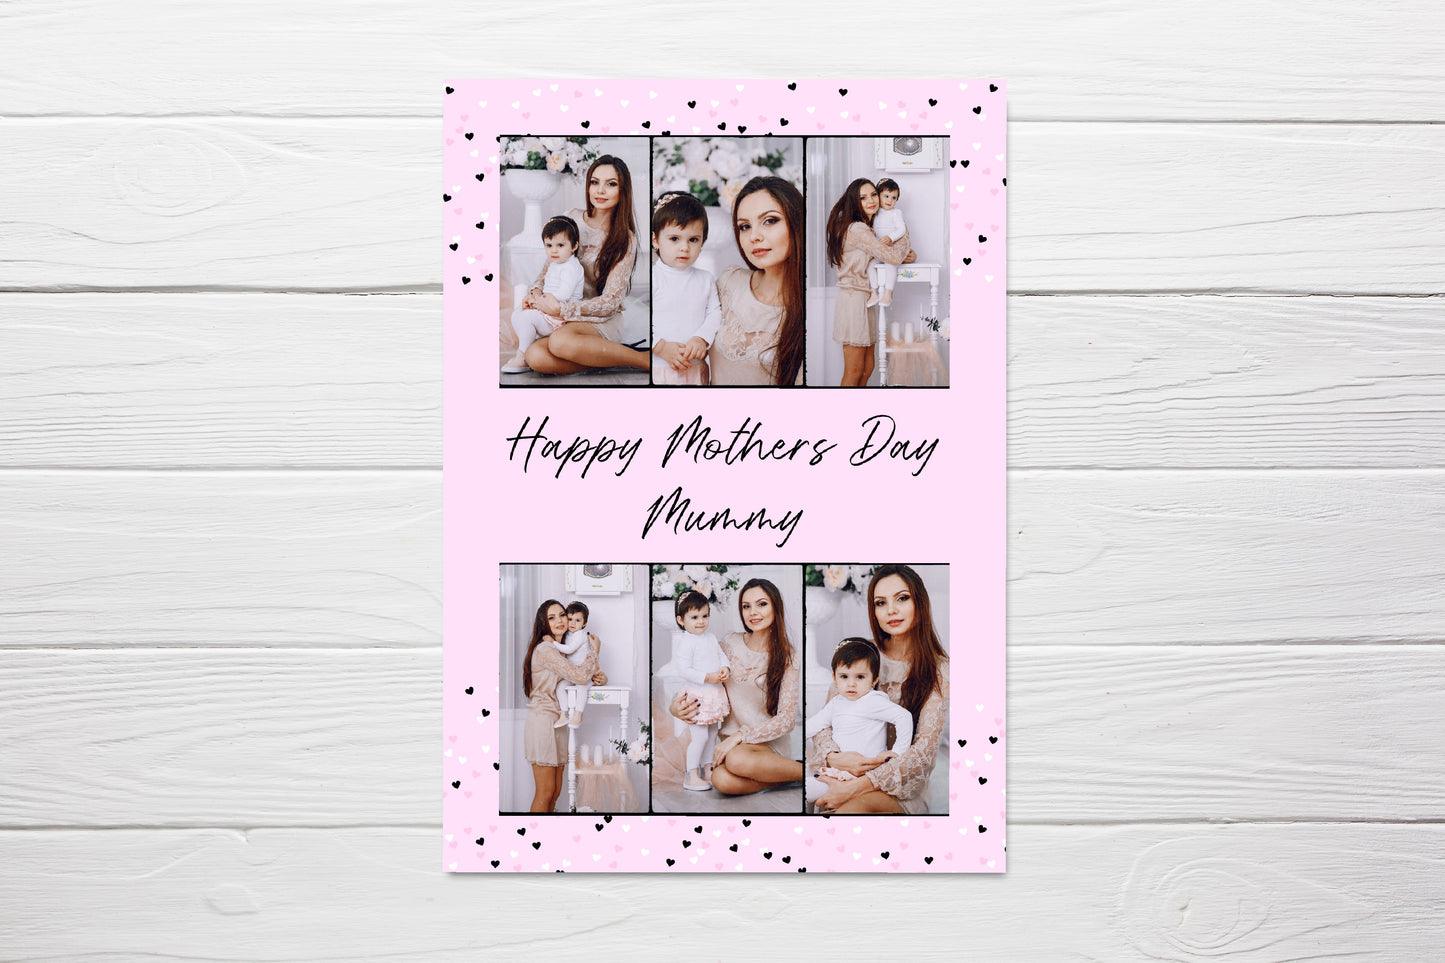 Mothers Day Card | Personalised Image Column Photo Card | Custom Photo Card